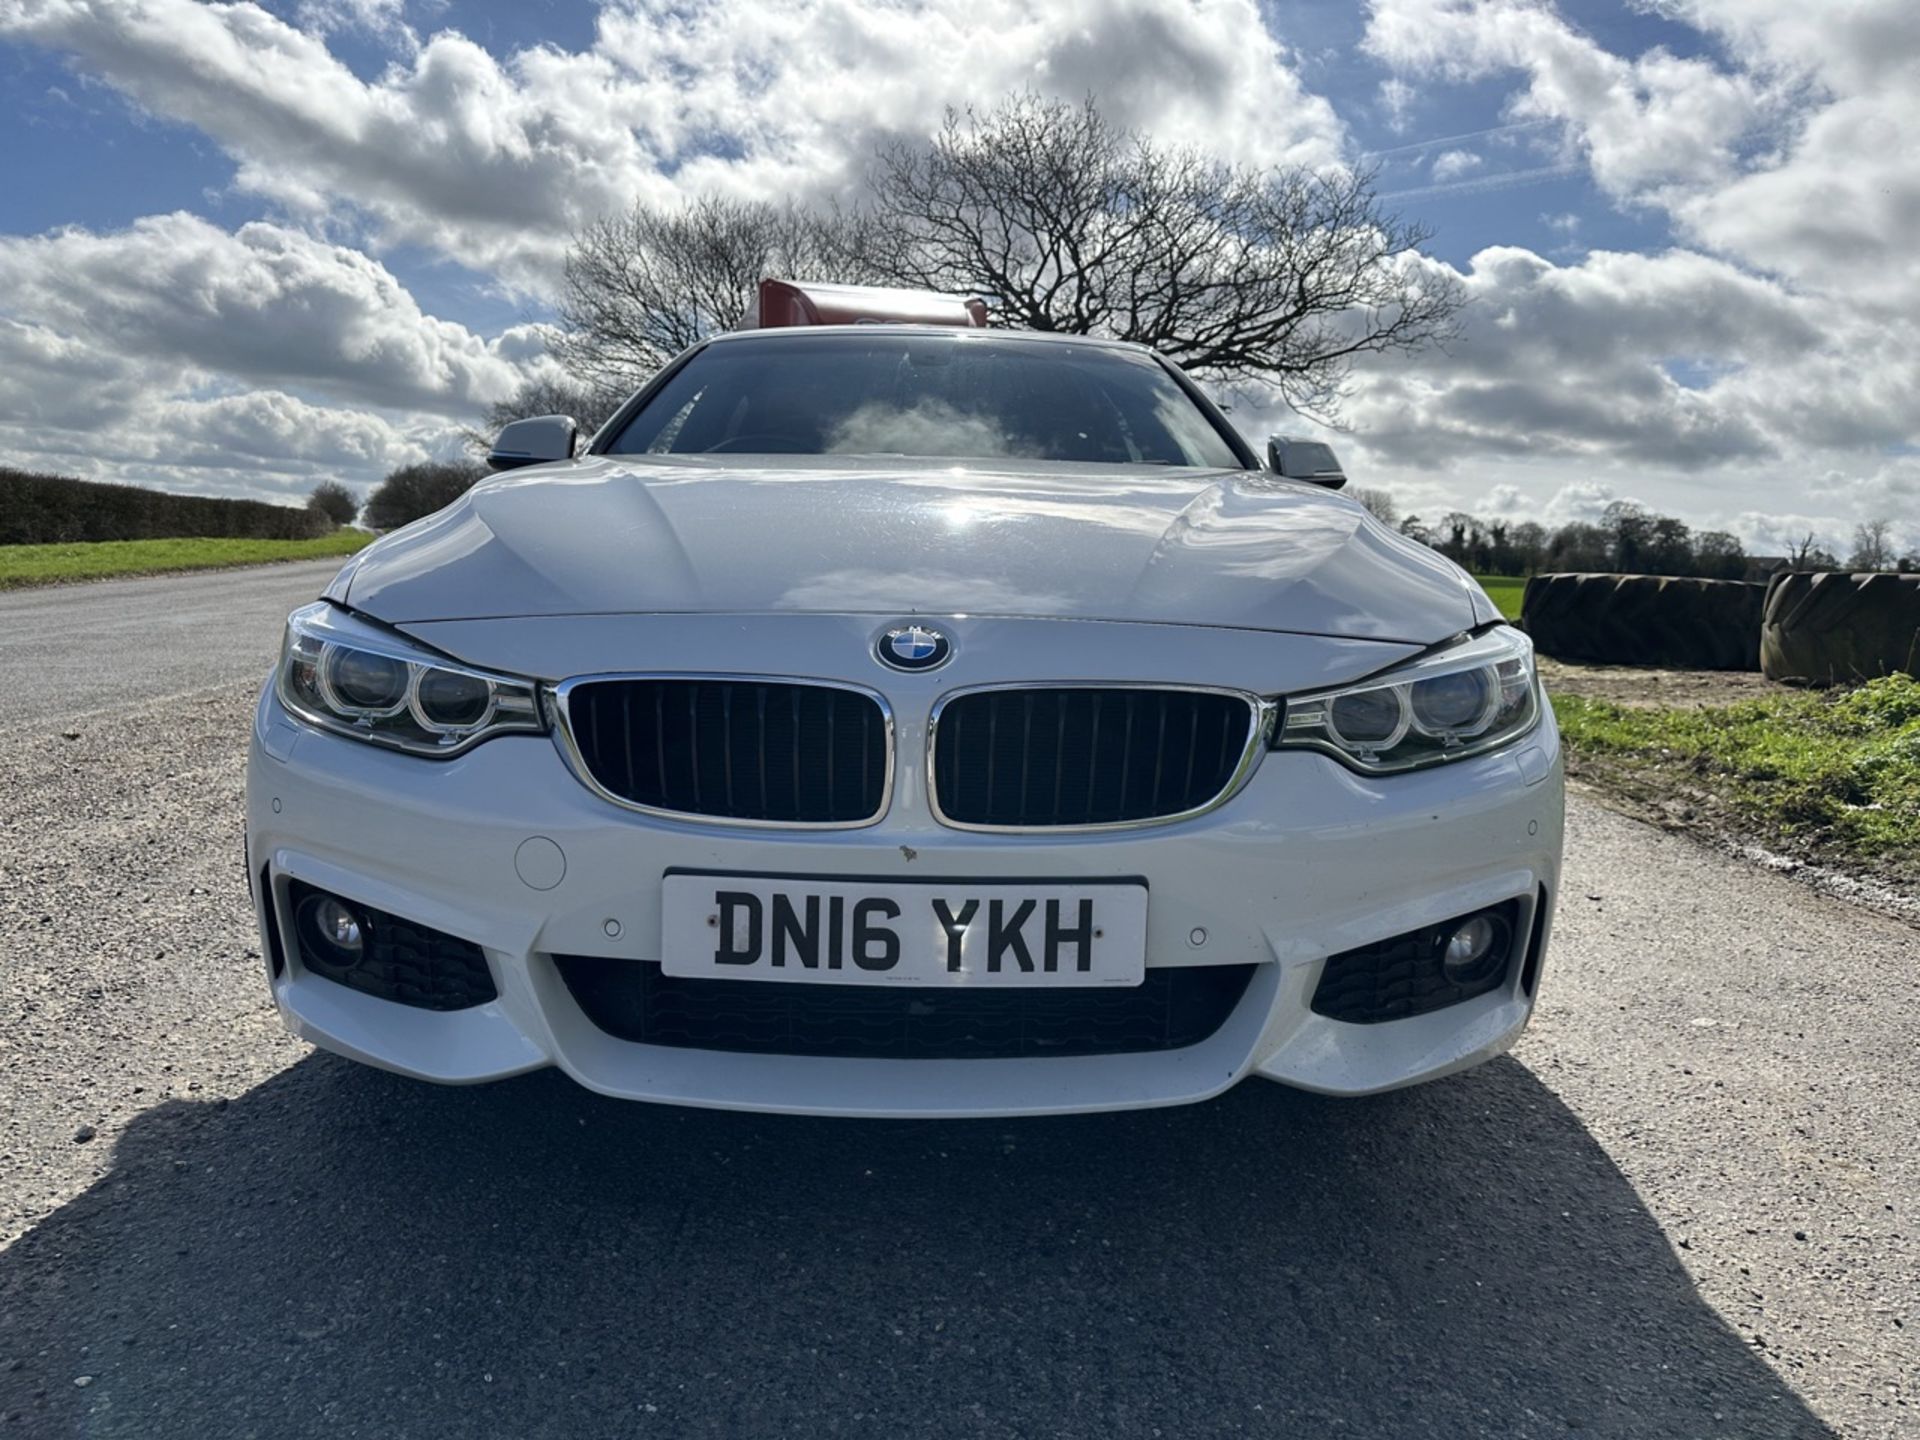 BMW 4 SERIES 420i M Sport 5dr [Professional Media] Manual - Petrol - 2.0 - Coupe- 54k miles - 2016 - Image 7 of 15